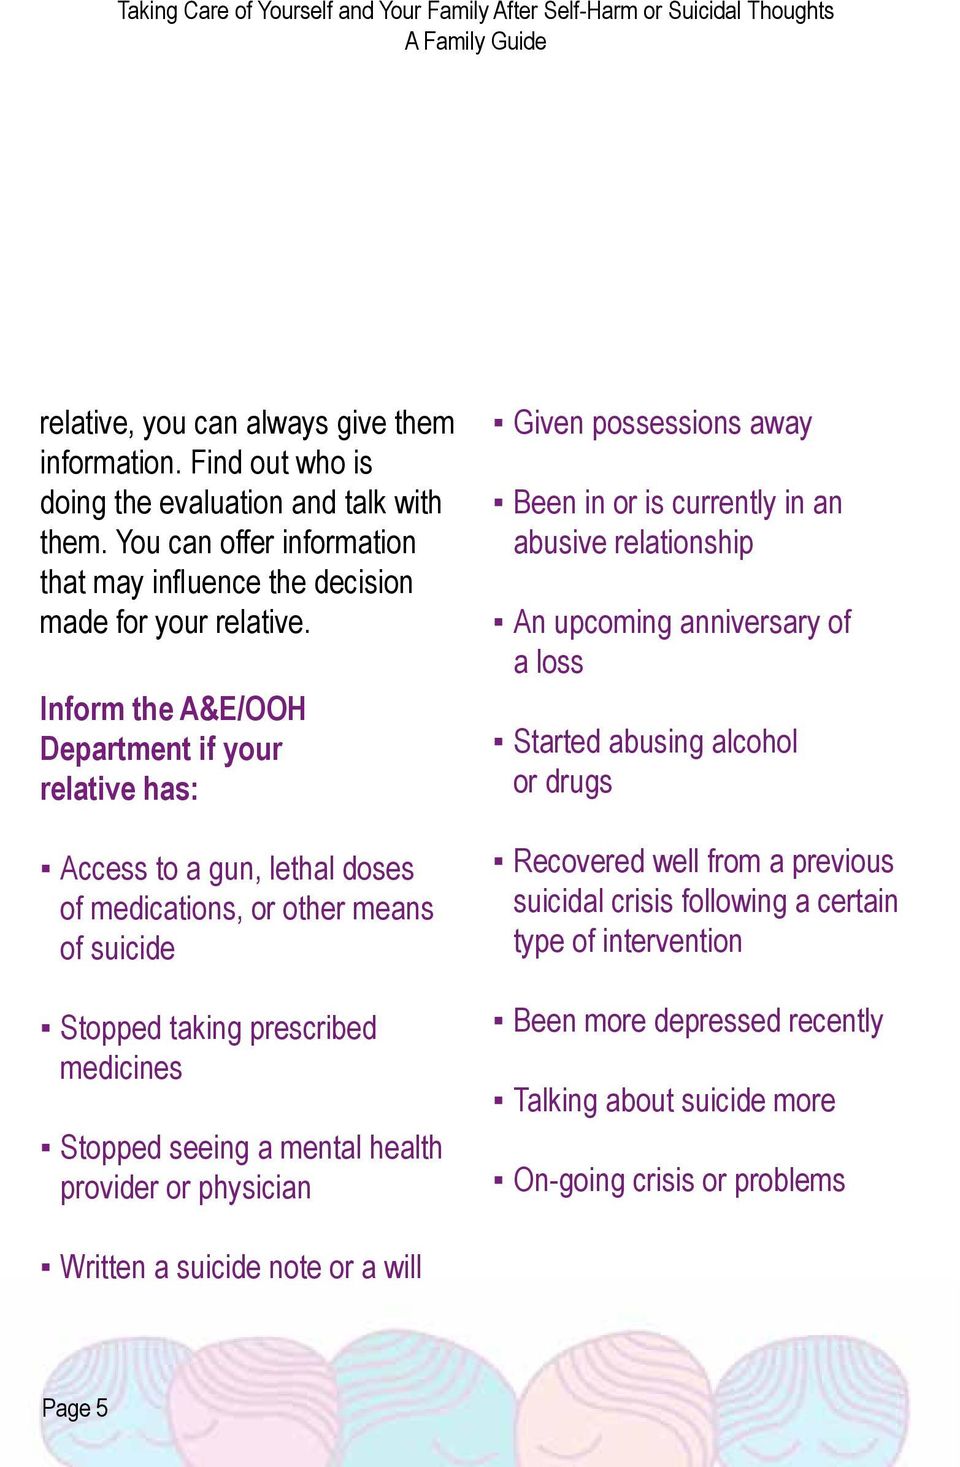 means of suicide Stopped taking prescribed medicines Stopped seeing a mental health provider or physician Given possessions away Been in or is currently in an abusive relationship An upcoming